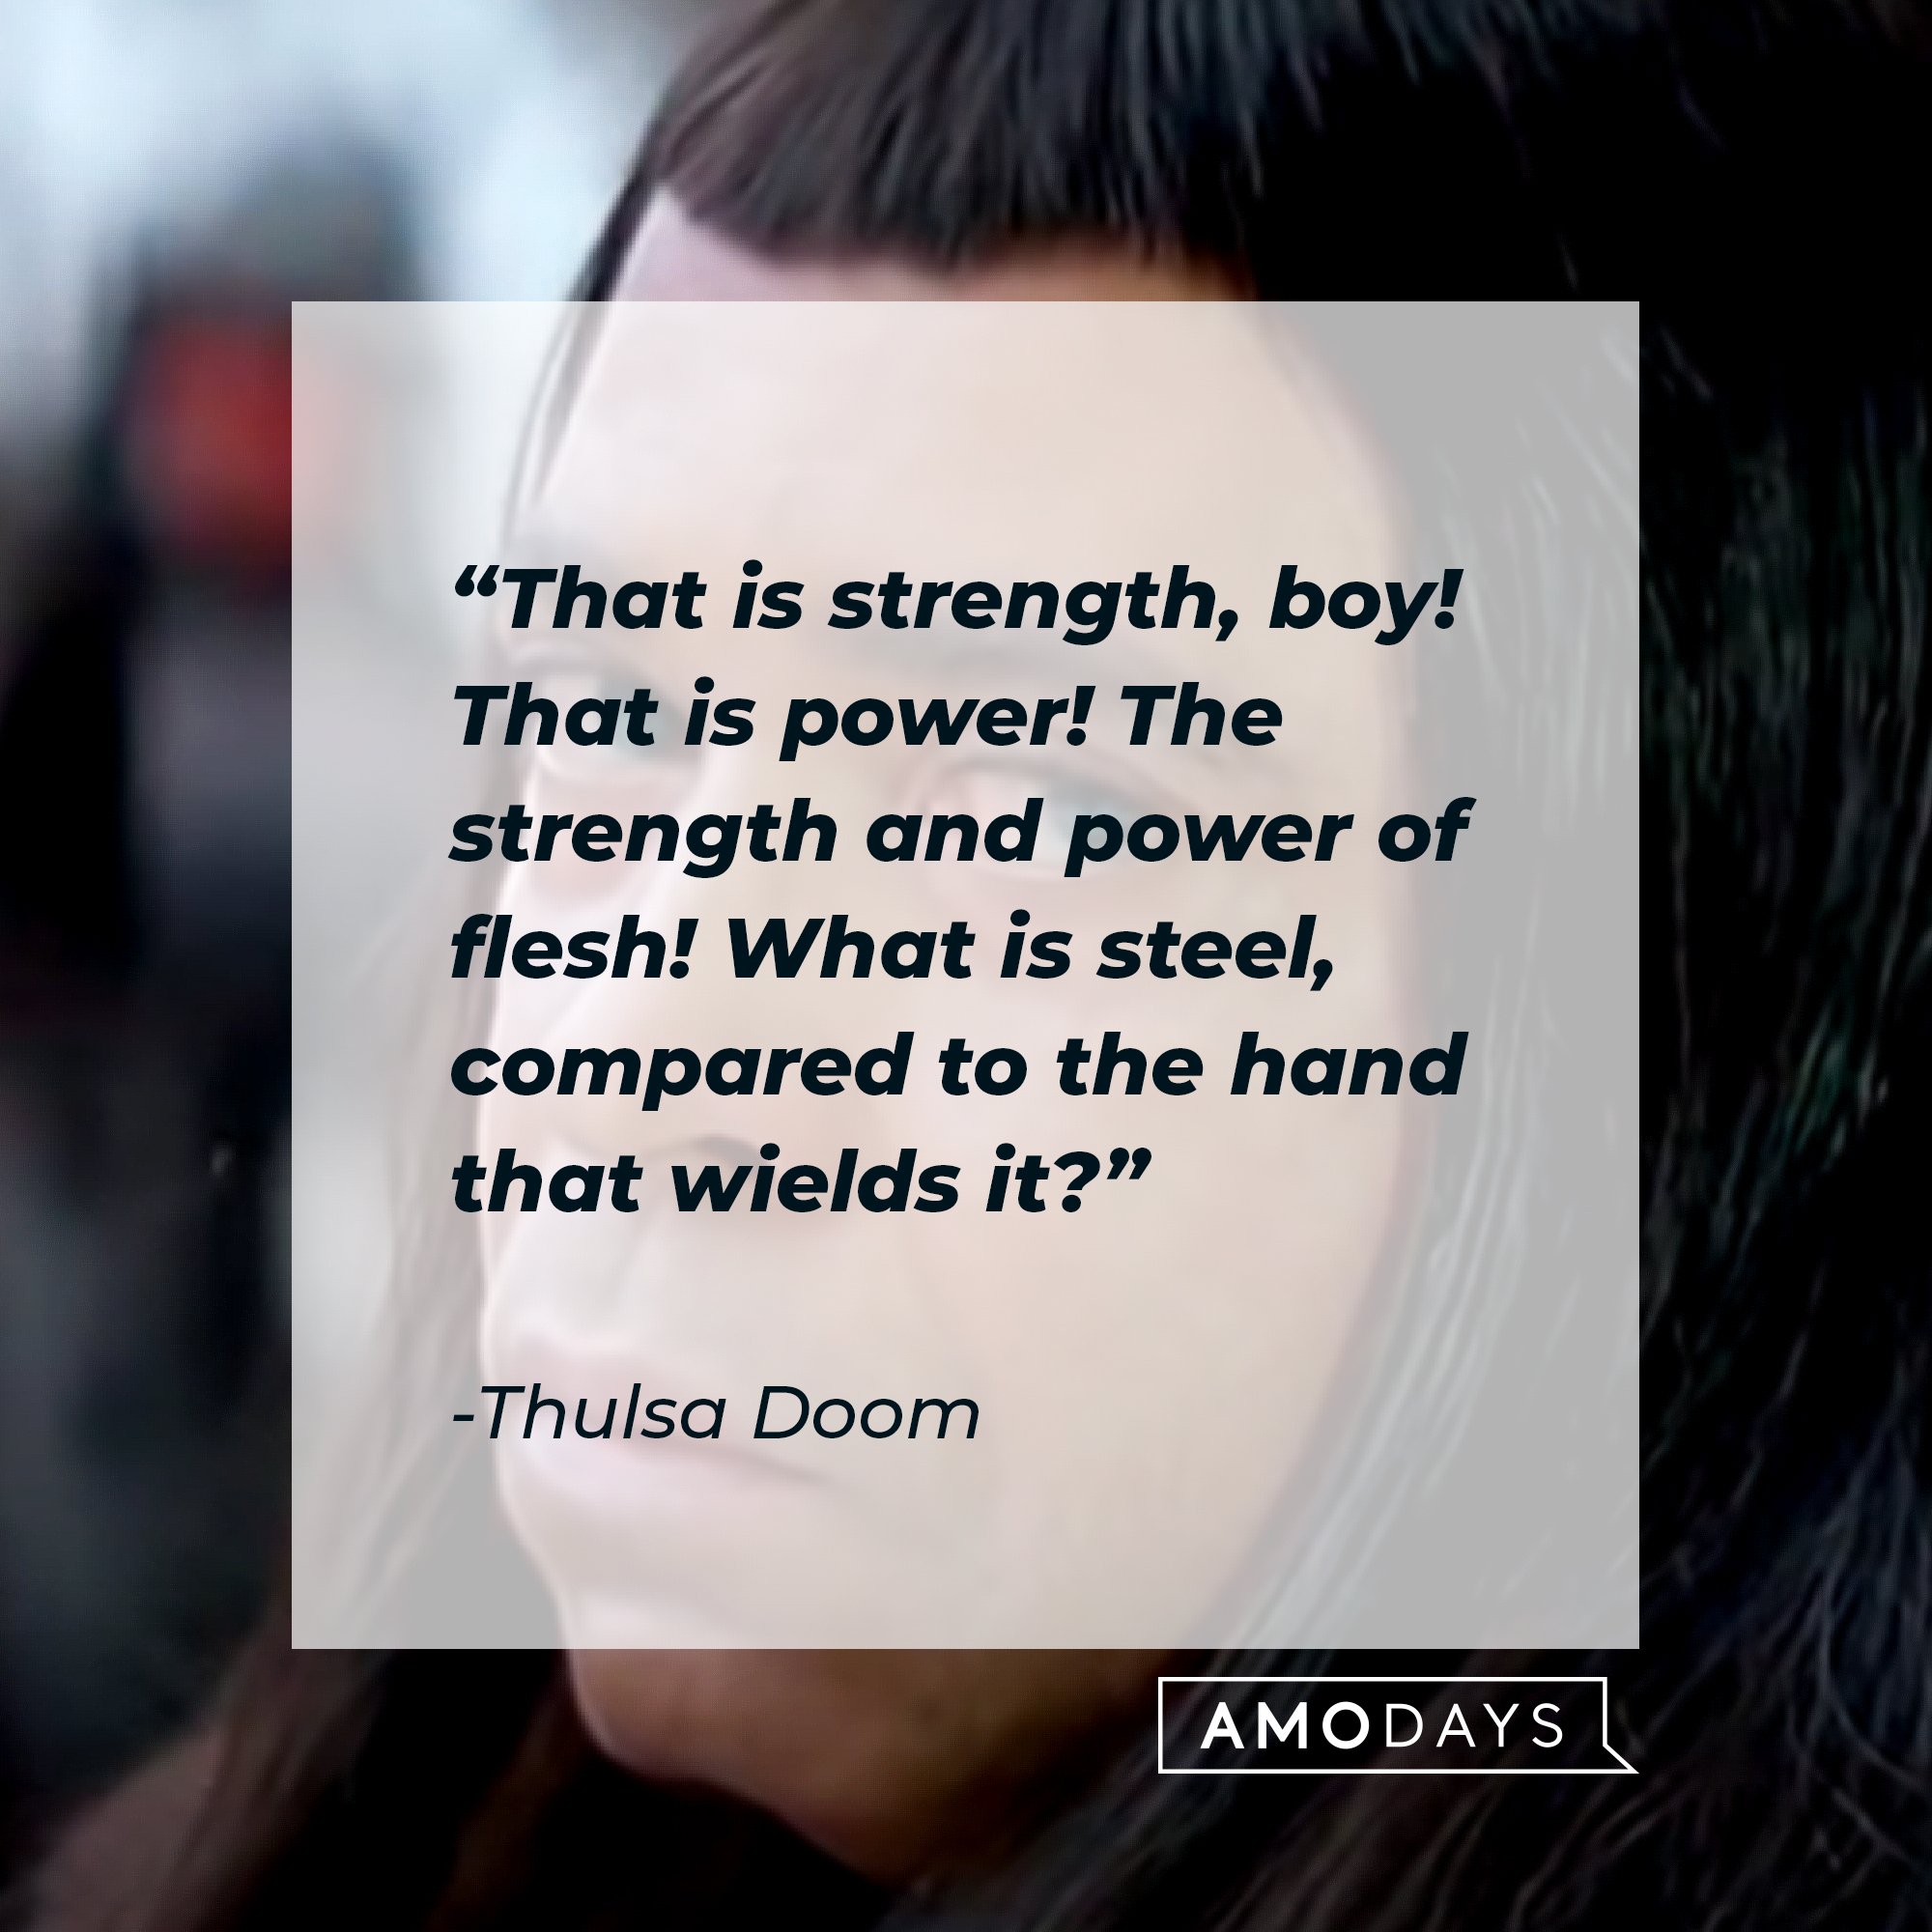 Thulsa Doom's quote: “That is strength, boy! That is power! The strength and power of flesh! What is steel, compared to the hand that wields it?” | Image: AmoDays